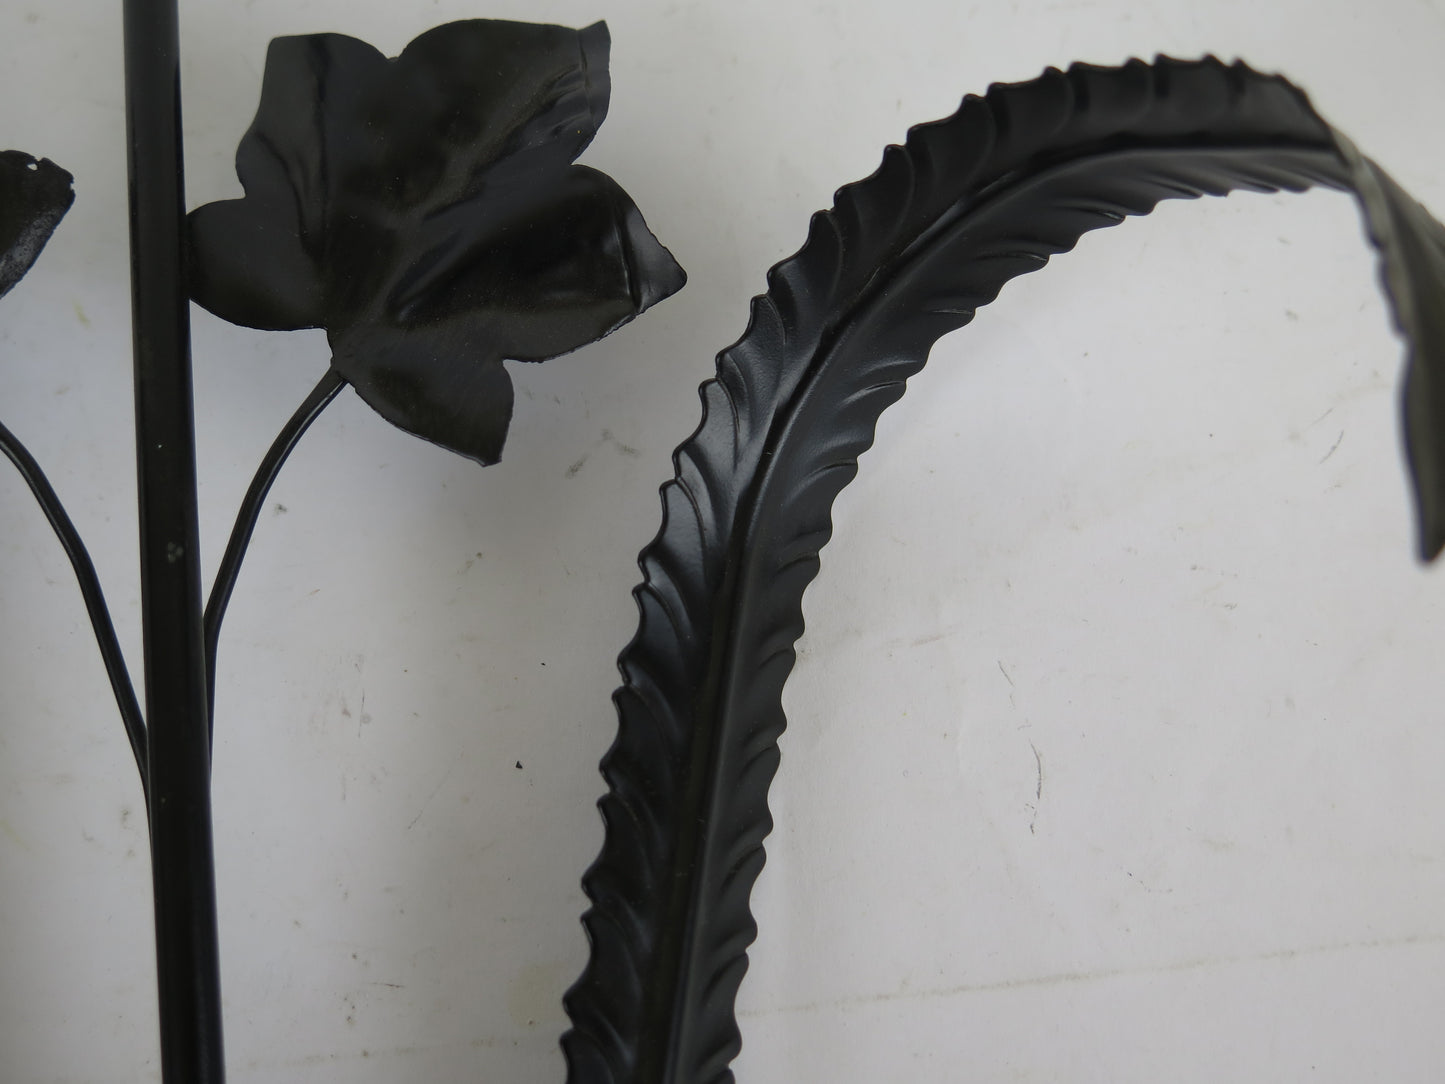 OLD WALL LAMP WITH TWO LIGHTS IN WROUGHT IRON LIGURIAN CRAFTS CH8